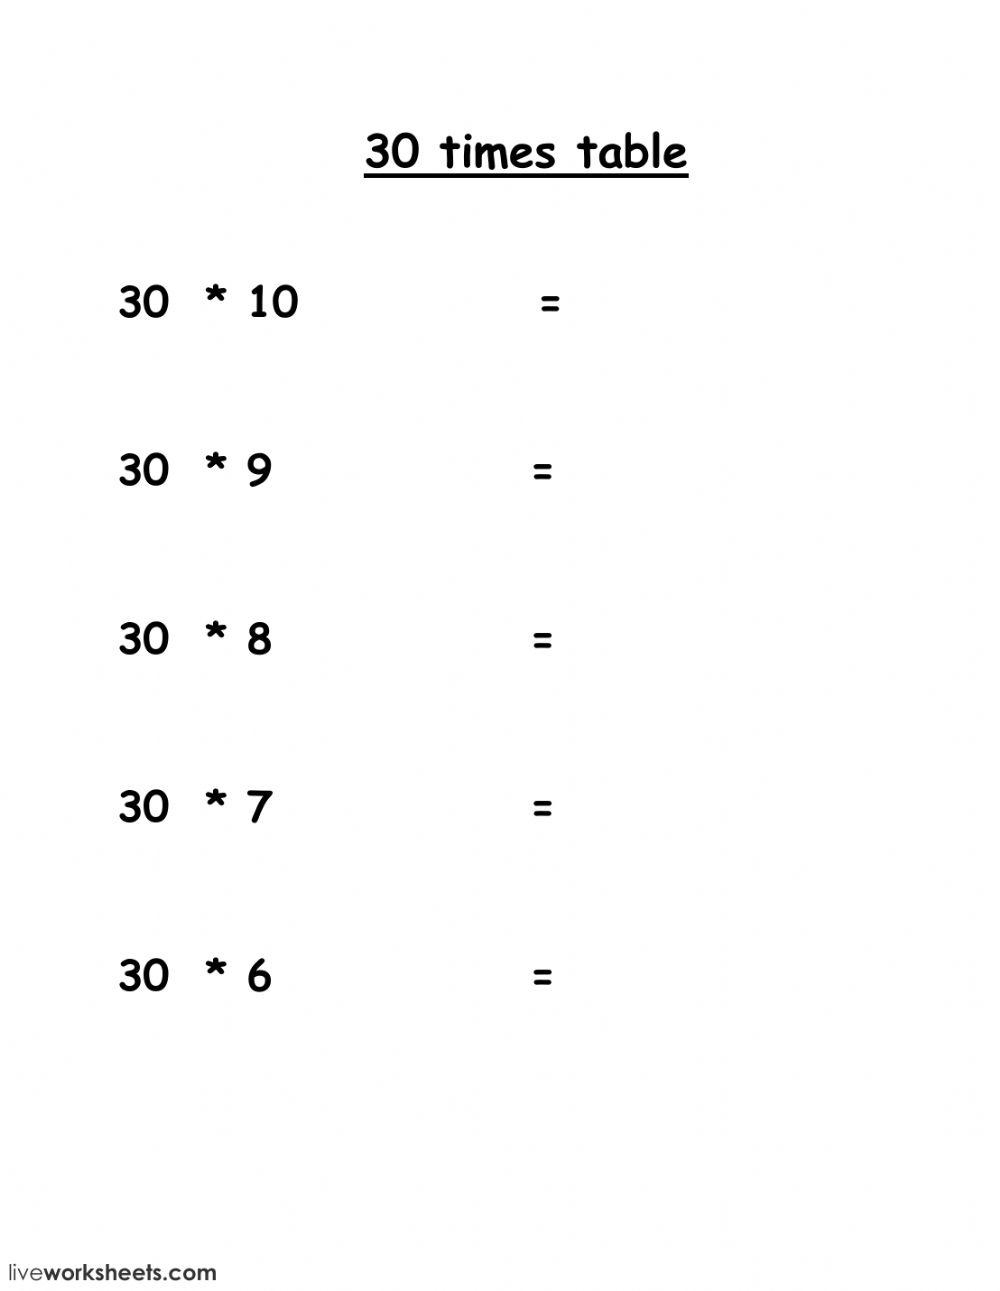 30 times table